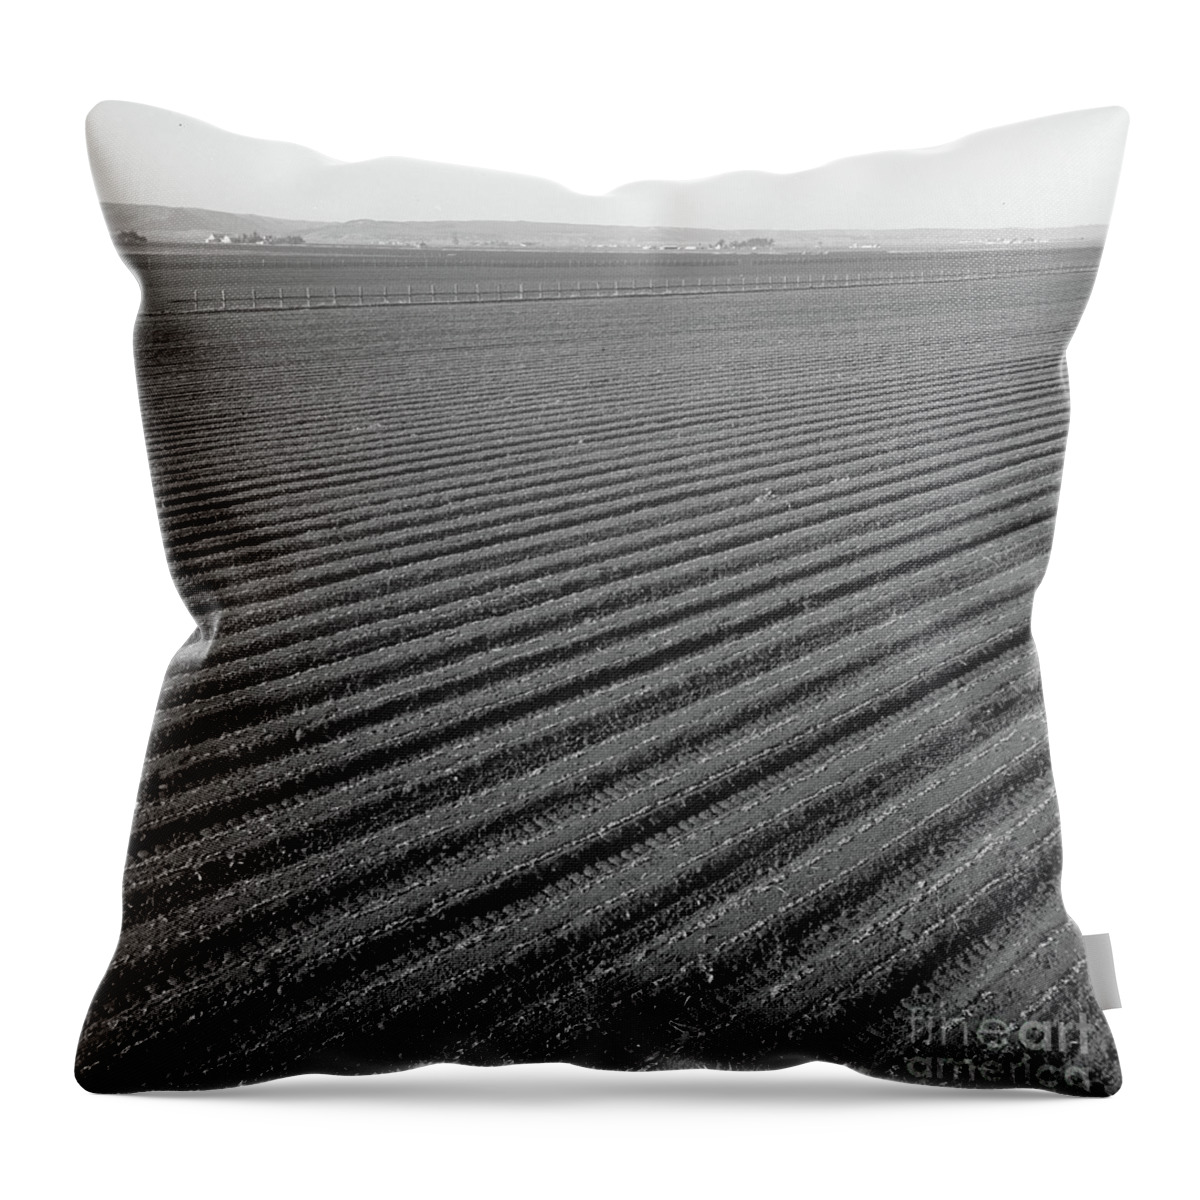 Row Throw Pillow featuring the photograph Lettuce Field In Salinas Valley, California, 1939 by Dorothea Lange